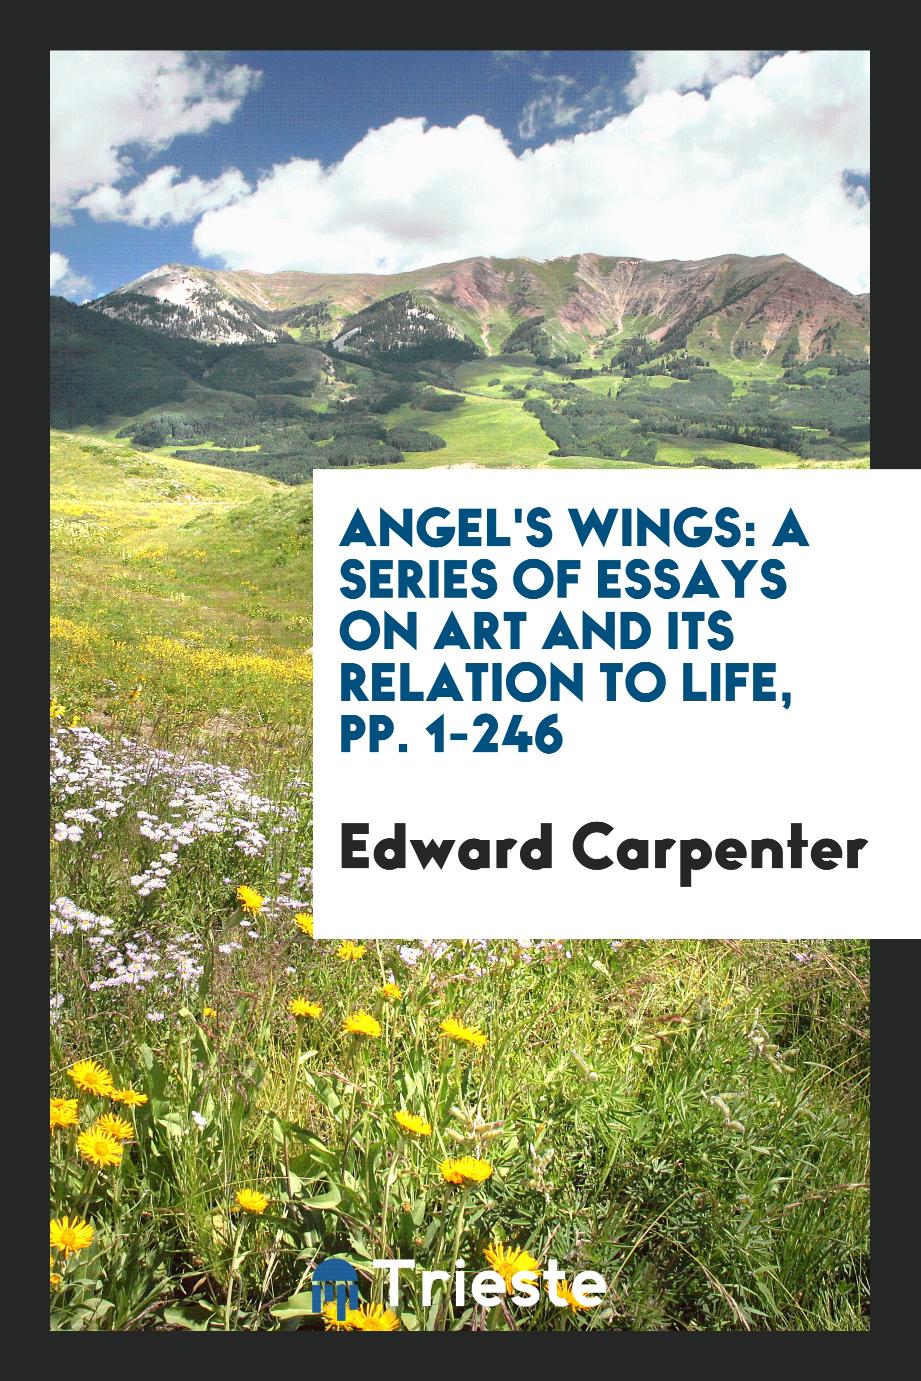 Angel's Wings: A Series of Essays on Art and Its Relation to Life, pp. 1-246